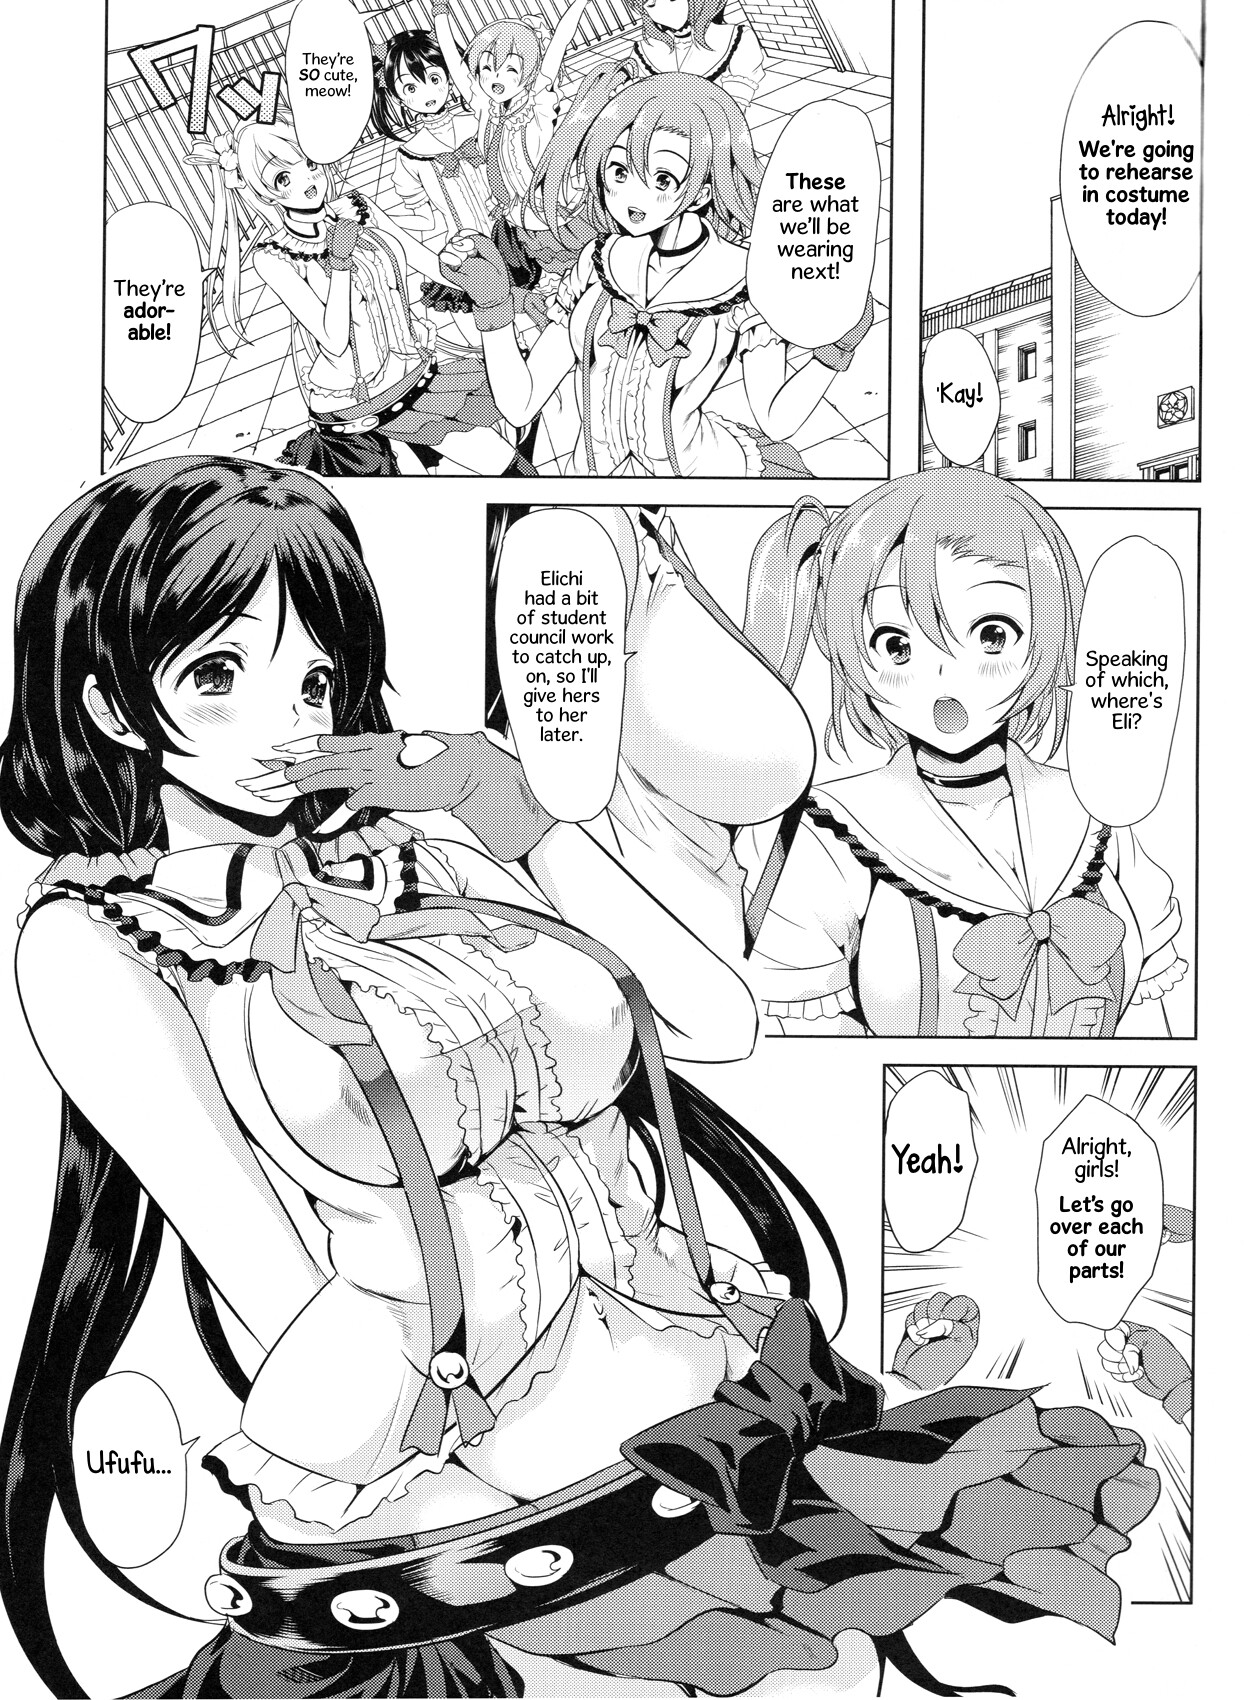 Hentai Manga Comic-I Want Elichi!! By Any and All Means...-Read-2